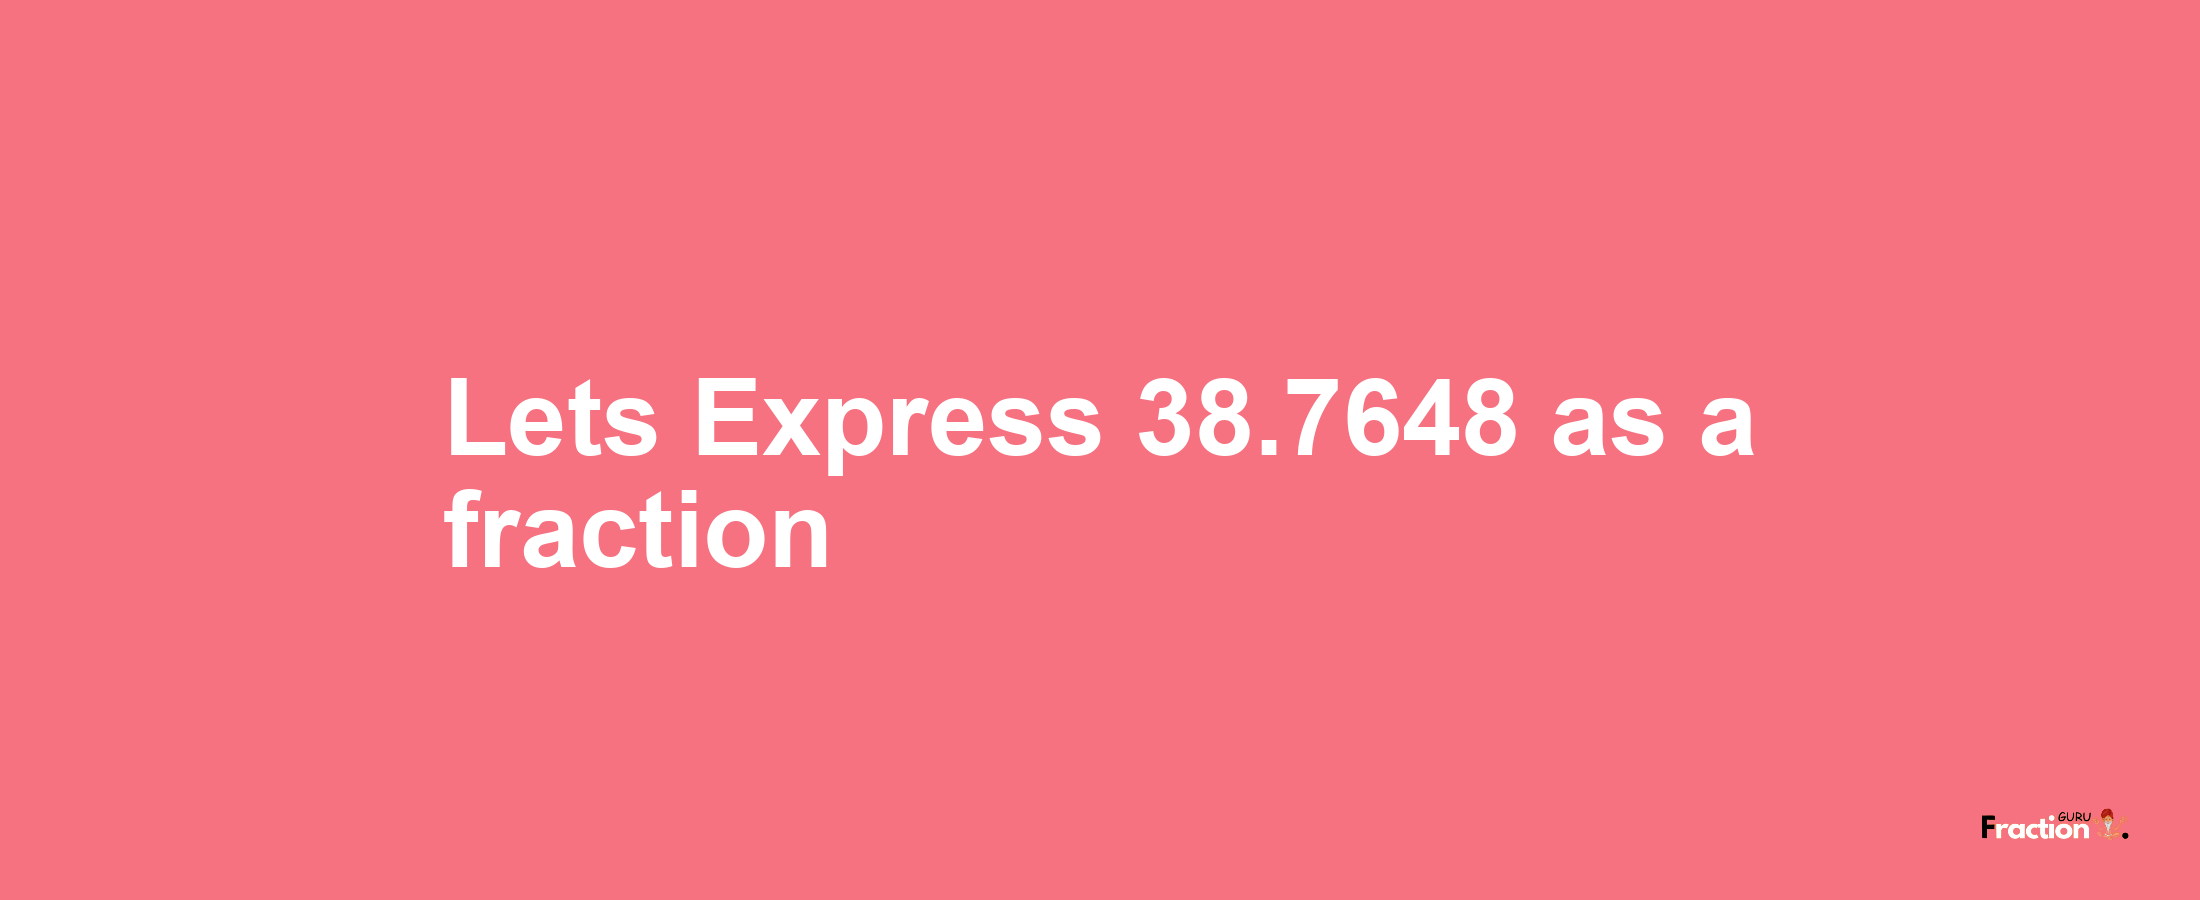 Lets Express 38.7648 as afraction